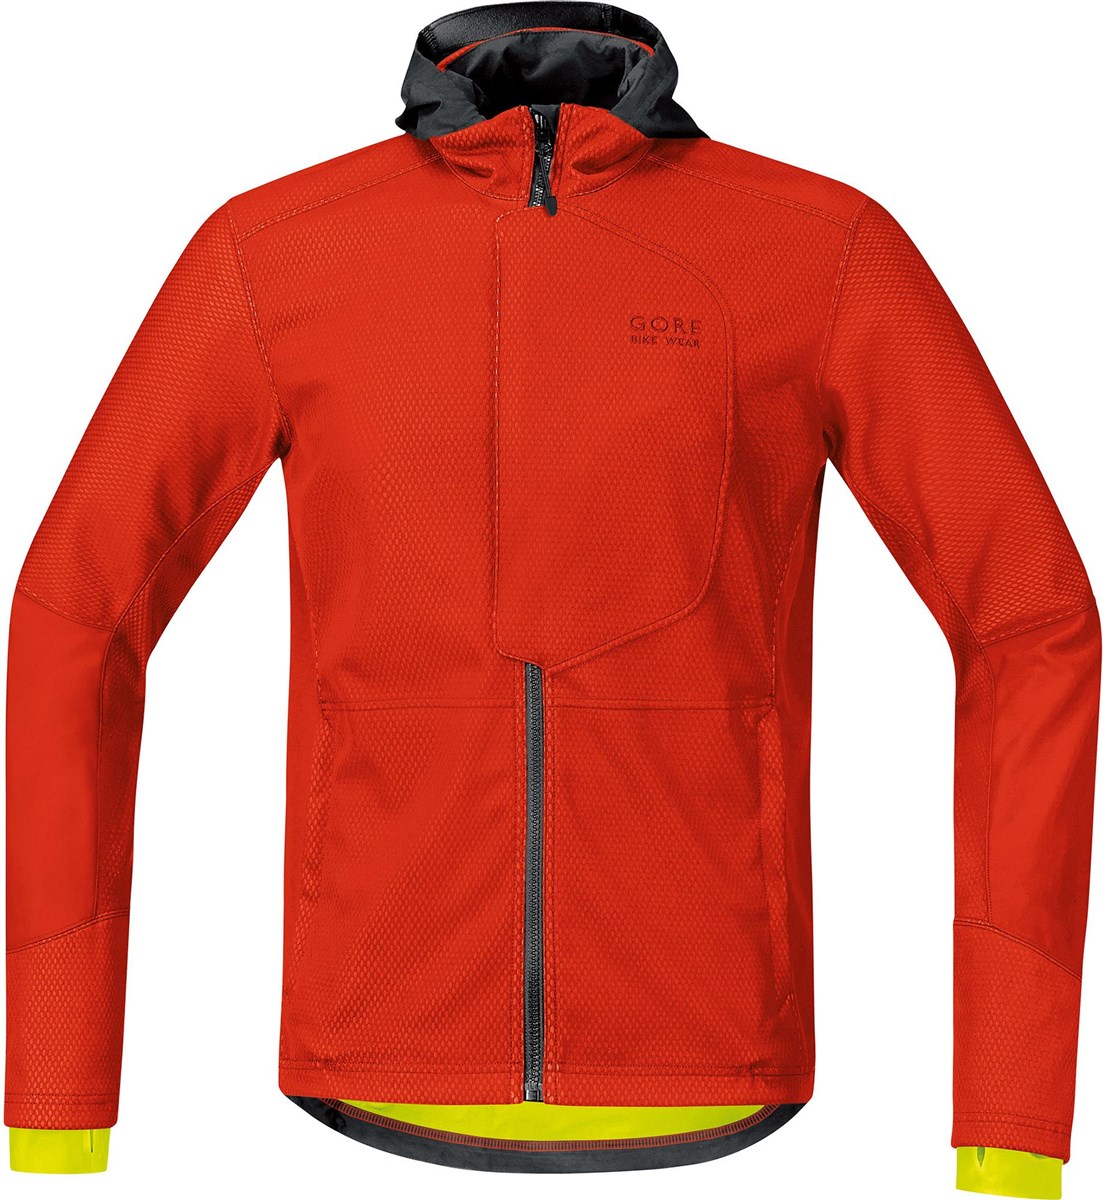 Gore E Urban Windstopper Soft Shell Jacket product image